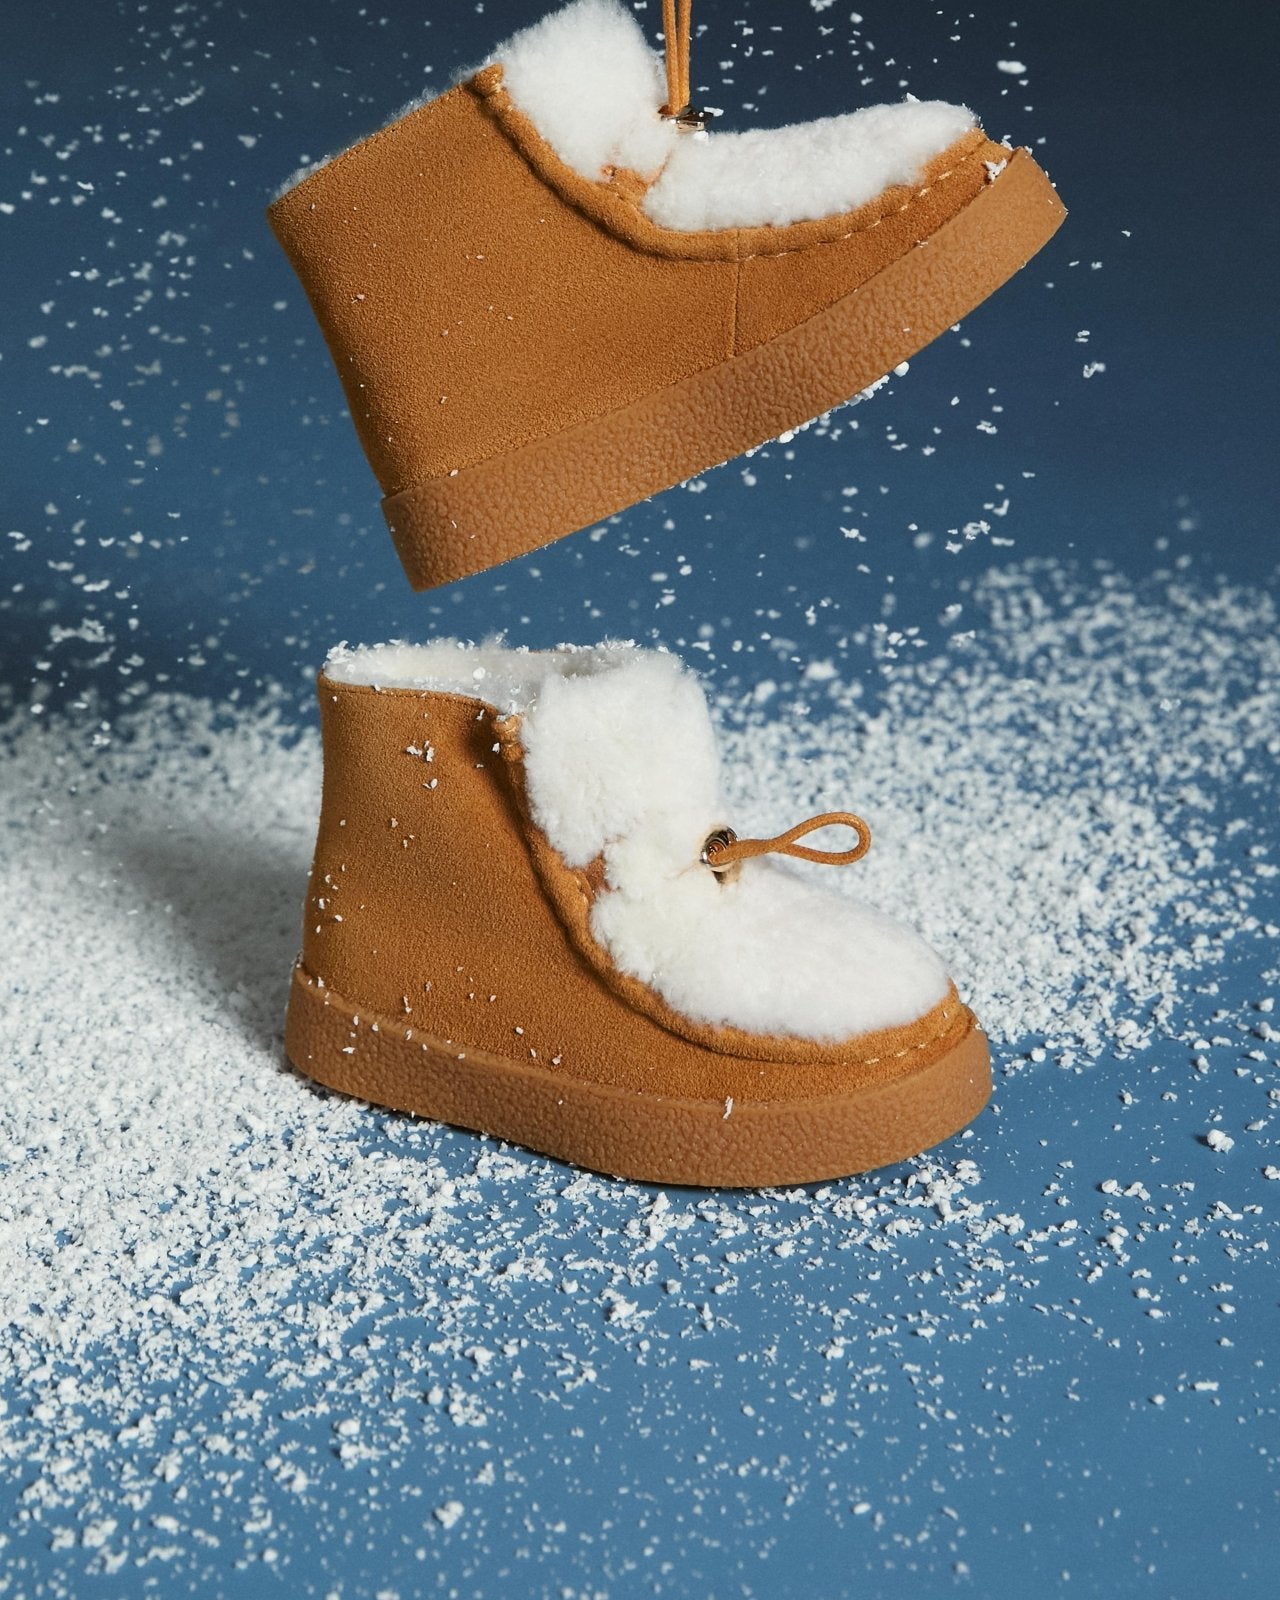 Aspen Camel Boots by Age of Innocence